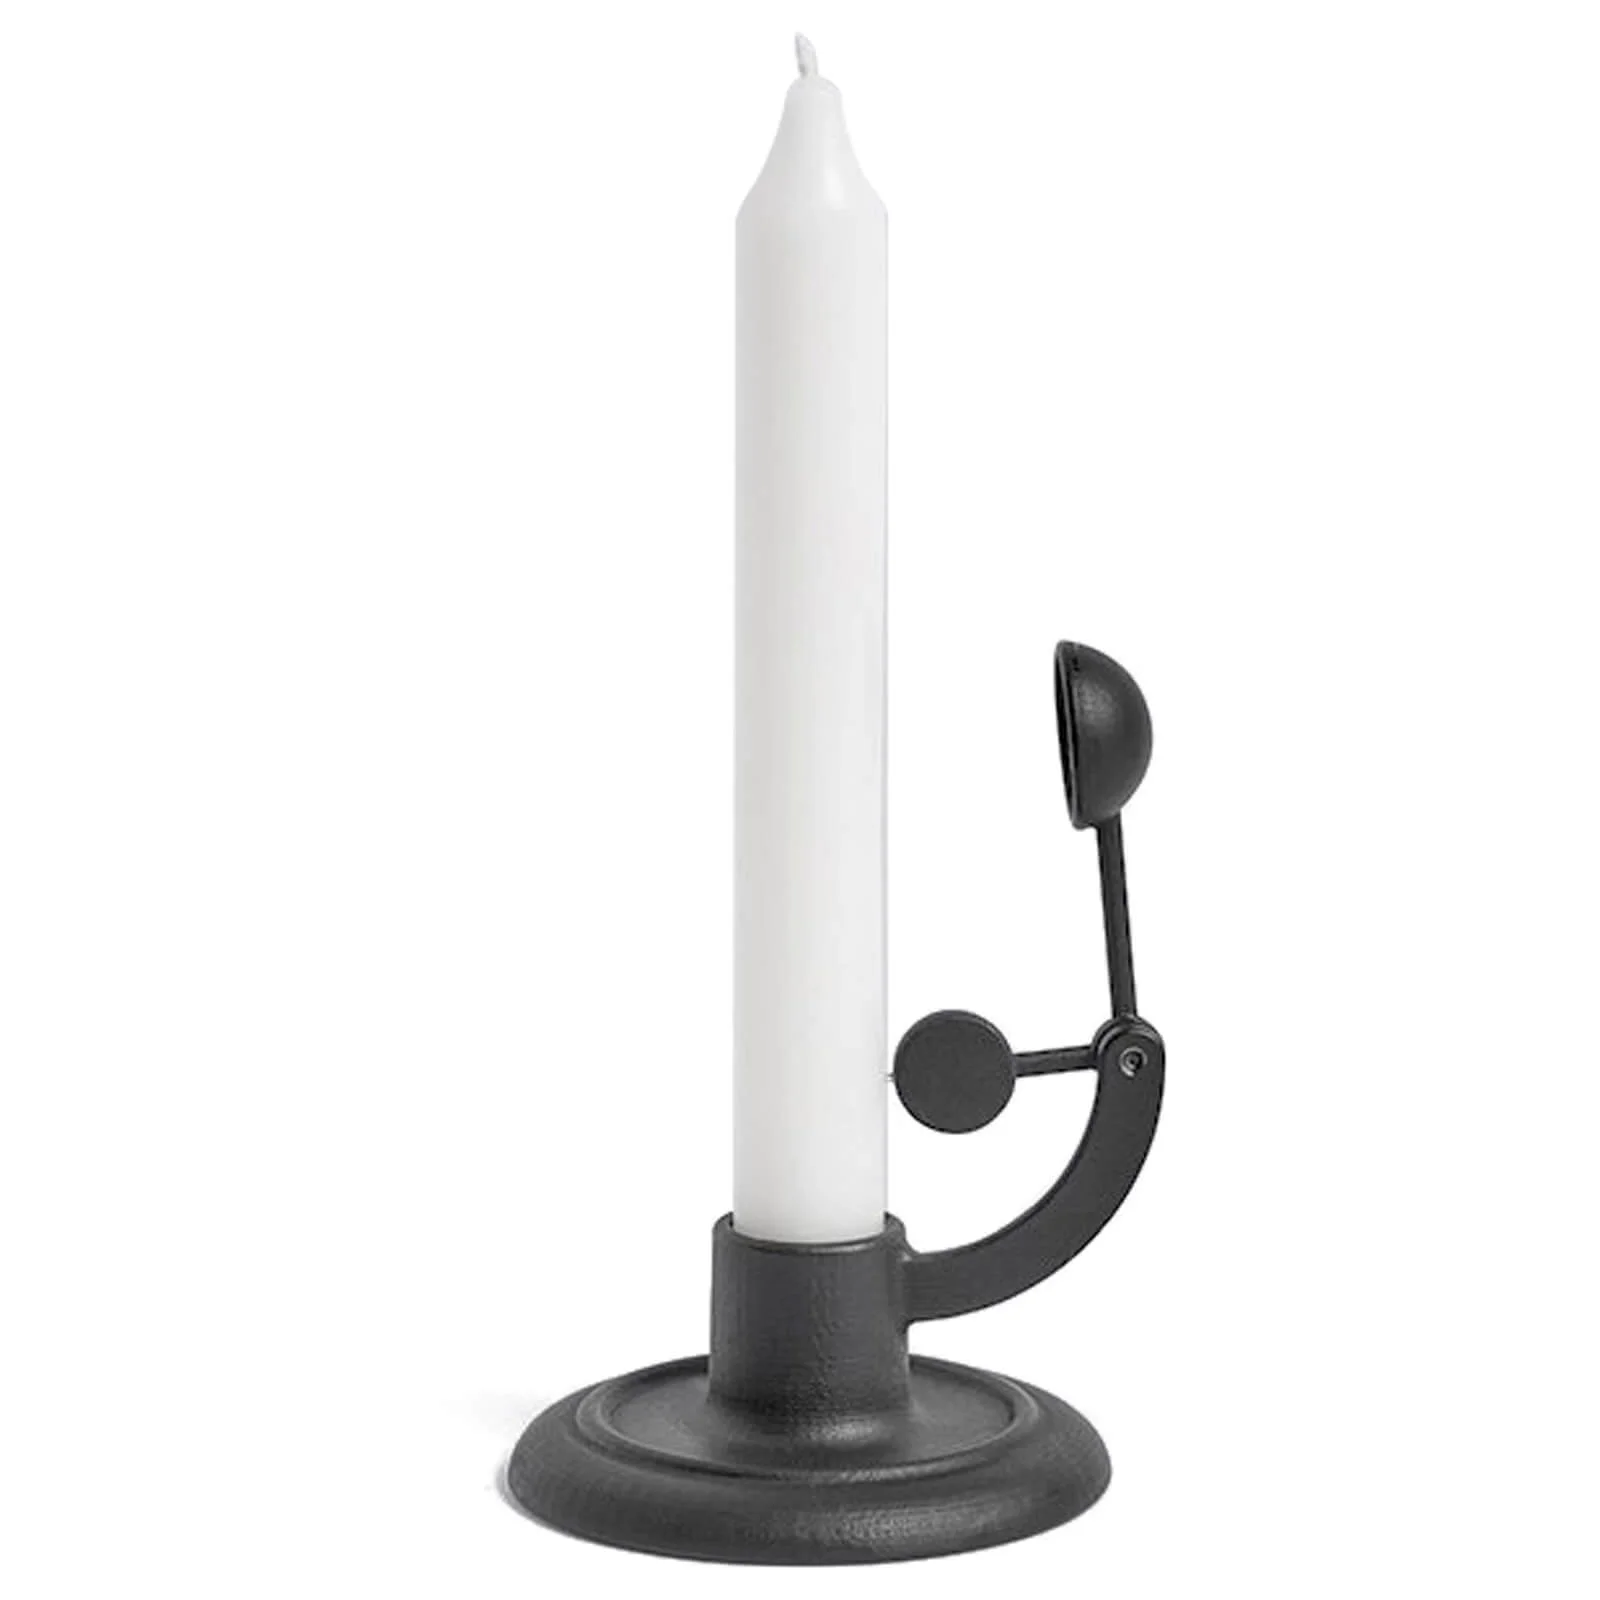 HAY Moment Candle Holder - Black Image 1